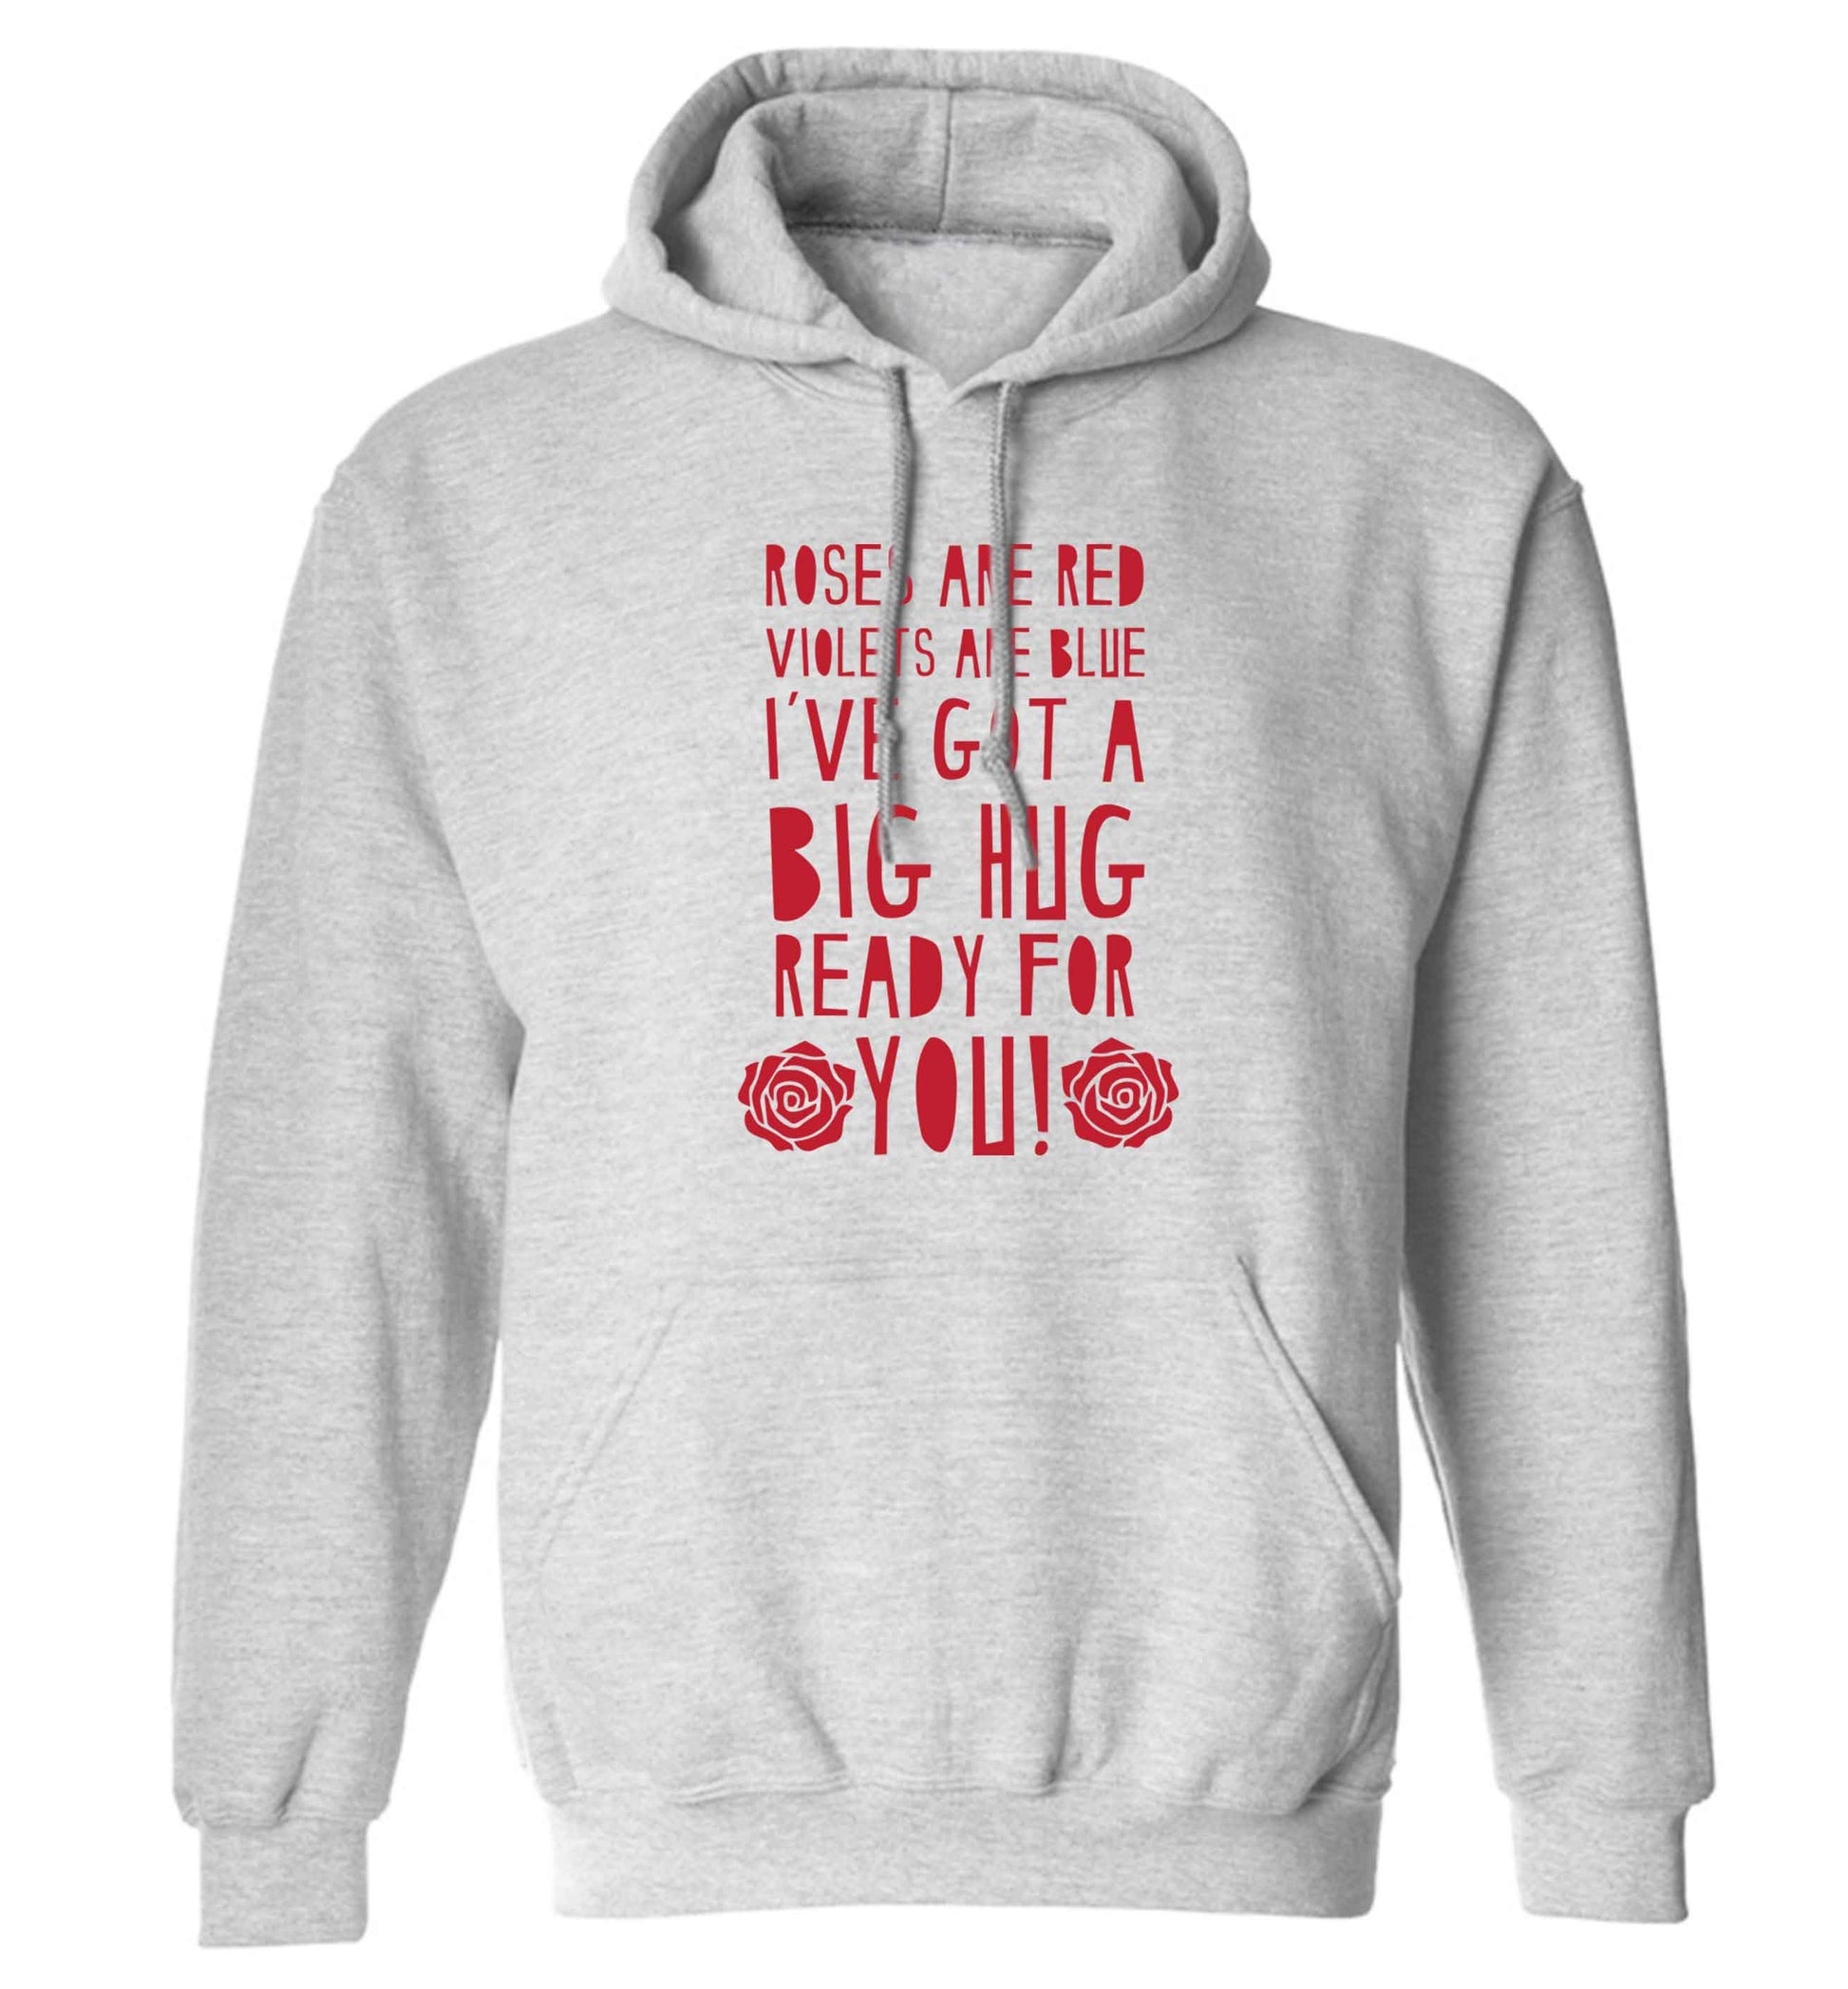 Roses are red violets are blue I've got a big hug coming for you adults unisex grey hoodie 2XL